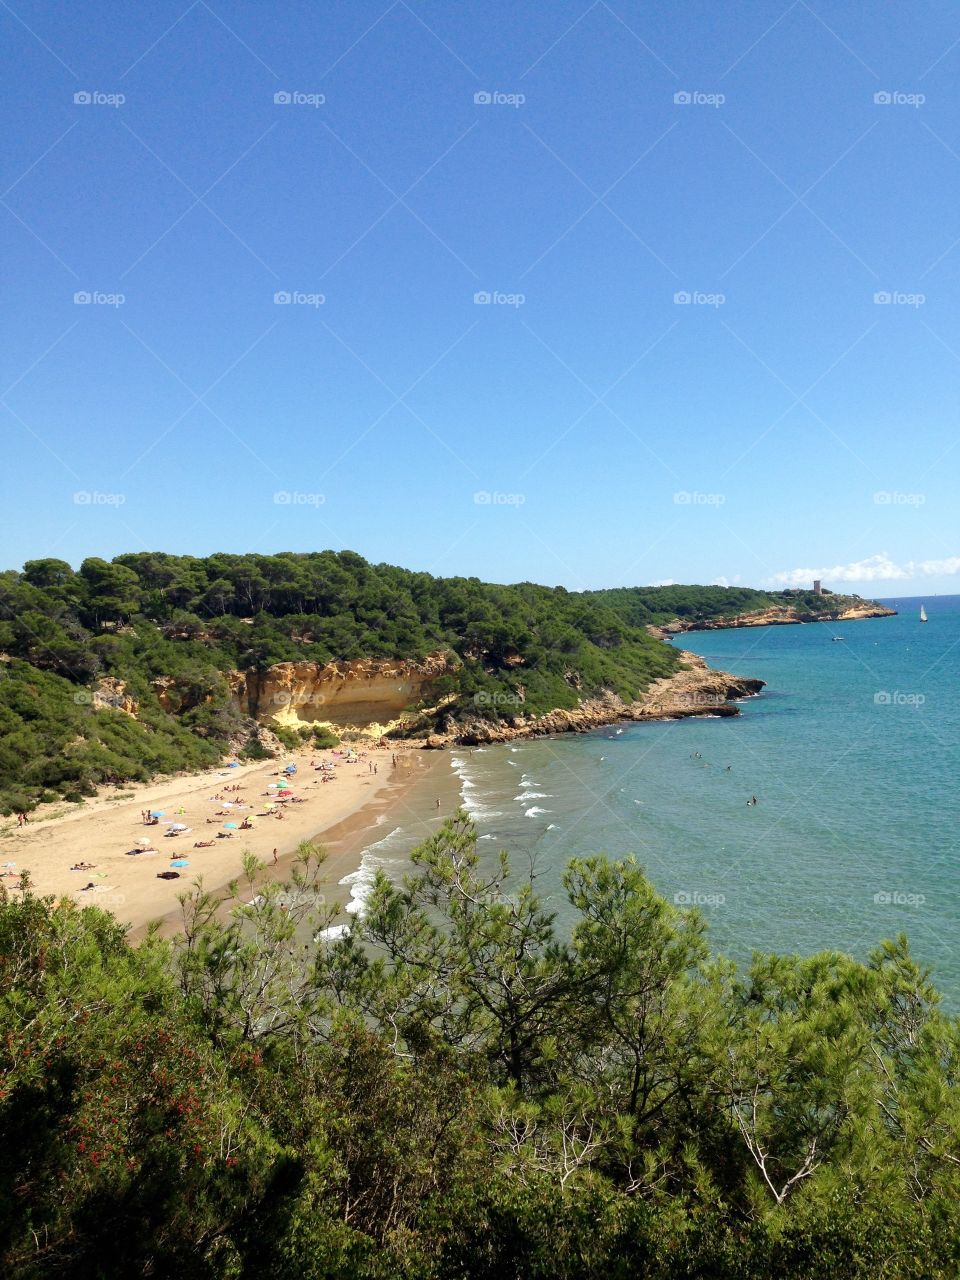 Cala Fonda. A view from the coast path of one of the most beautiful beaches I've ever seen. And it's close to my home!